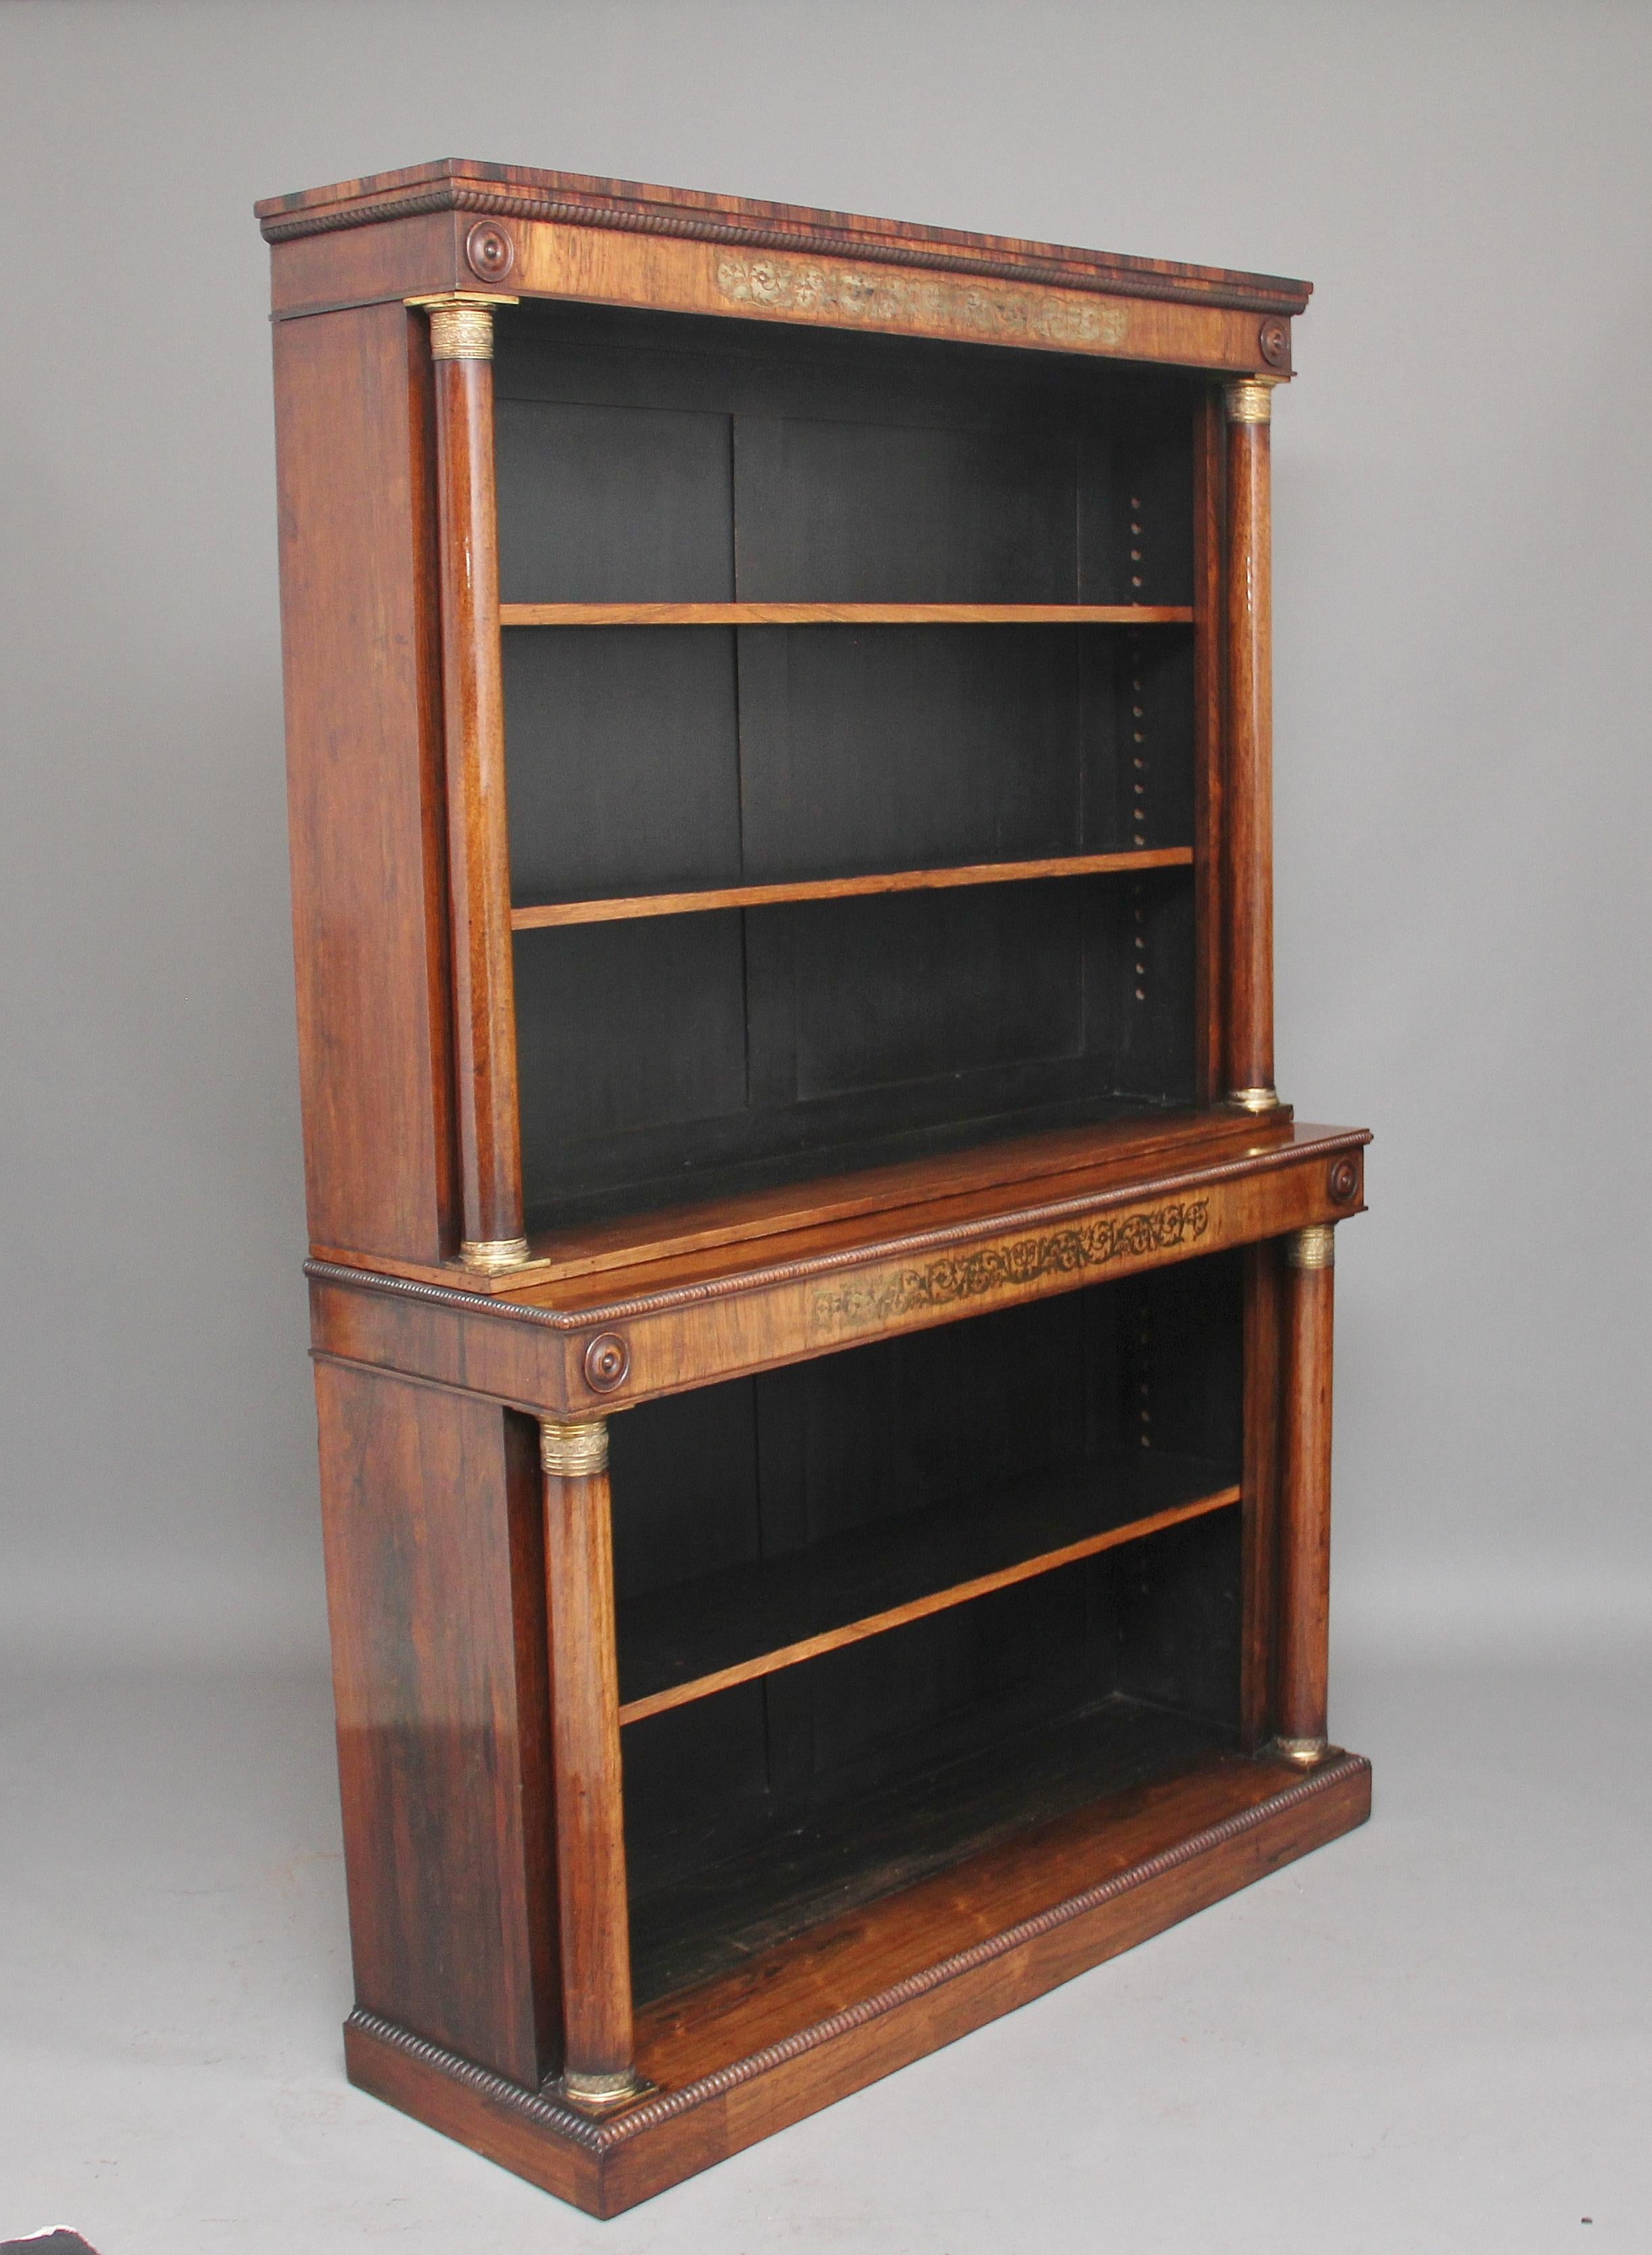 Early 19th Century Rosewood and Brass Inlaid Bookcase (Englisch)